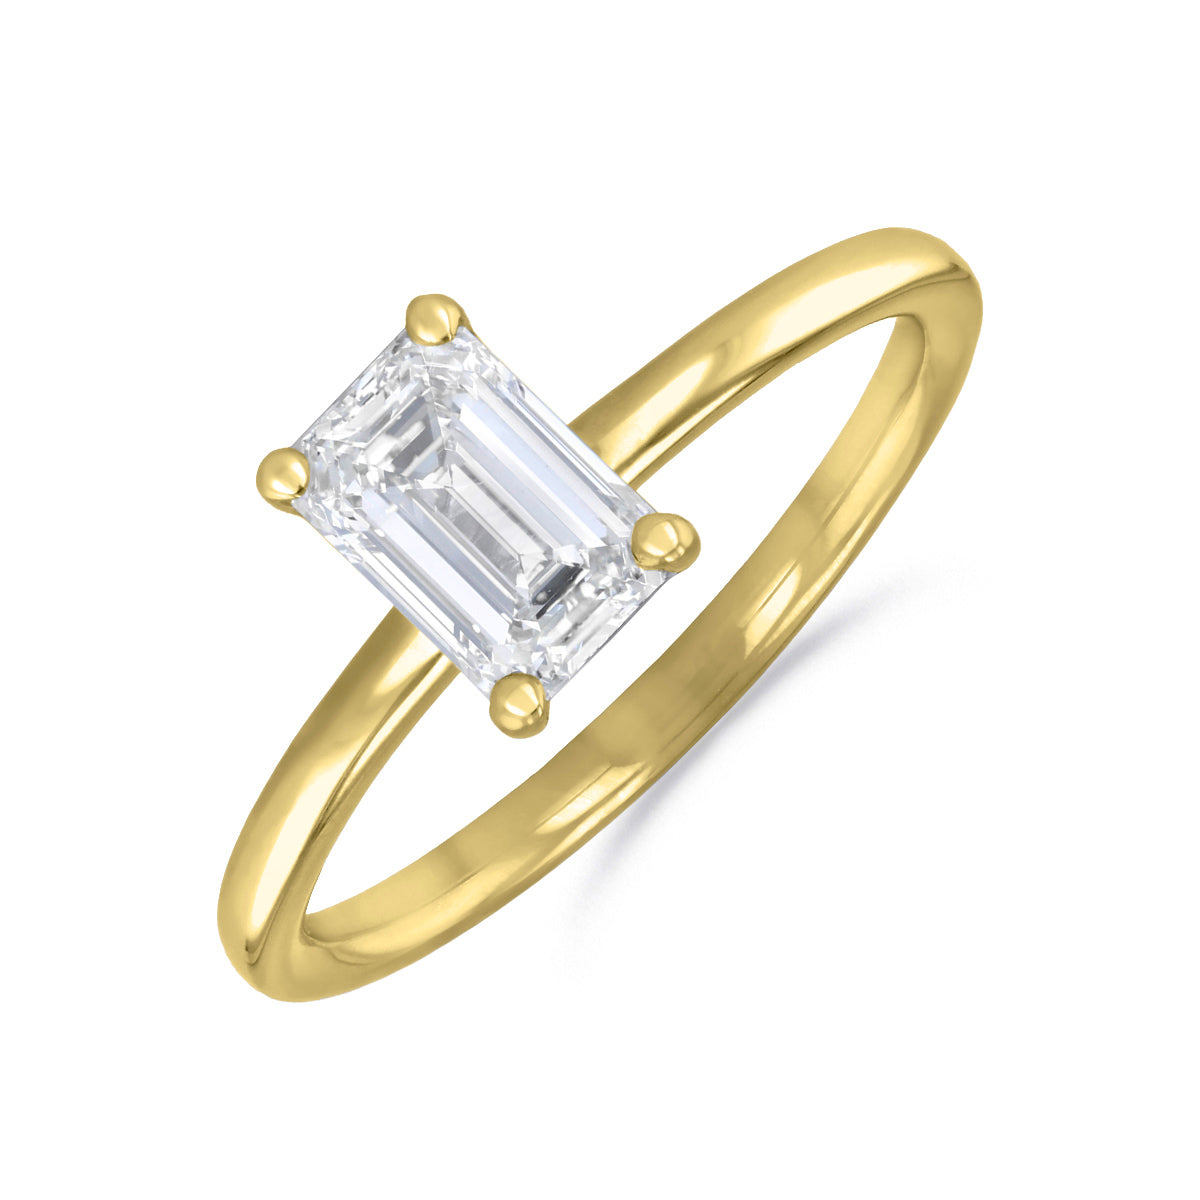 1-20ct-sofia-emerald-cut-solitaire-diamond-engagement-ring-18ct-yellow-gold